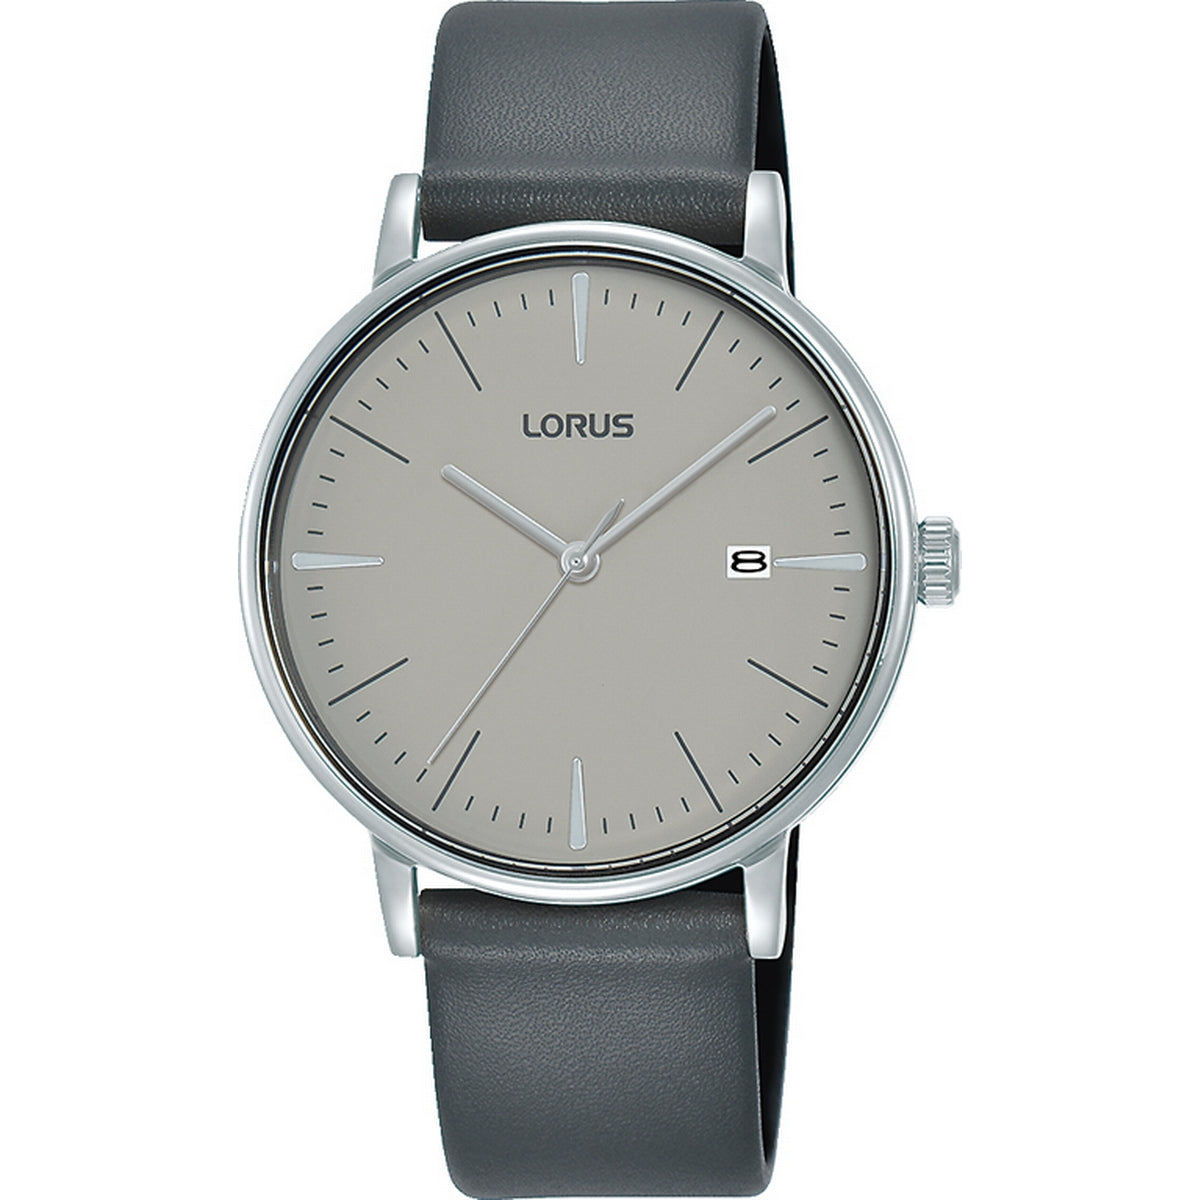 - Moores lorus stainless steel dial strap watch Jewellers gents quartz grey